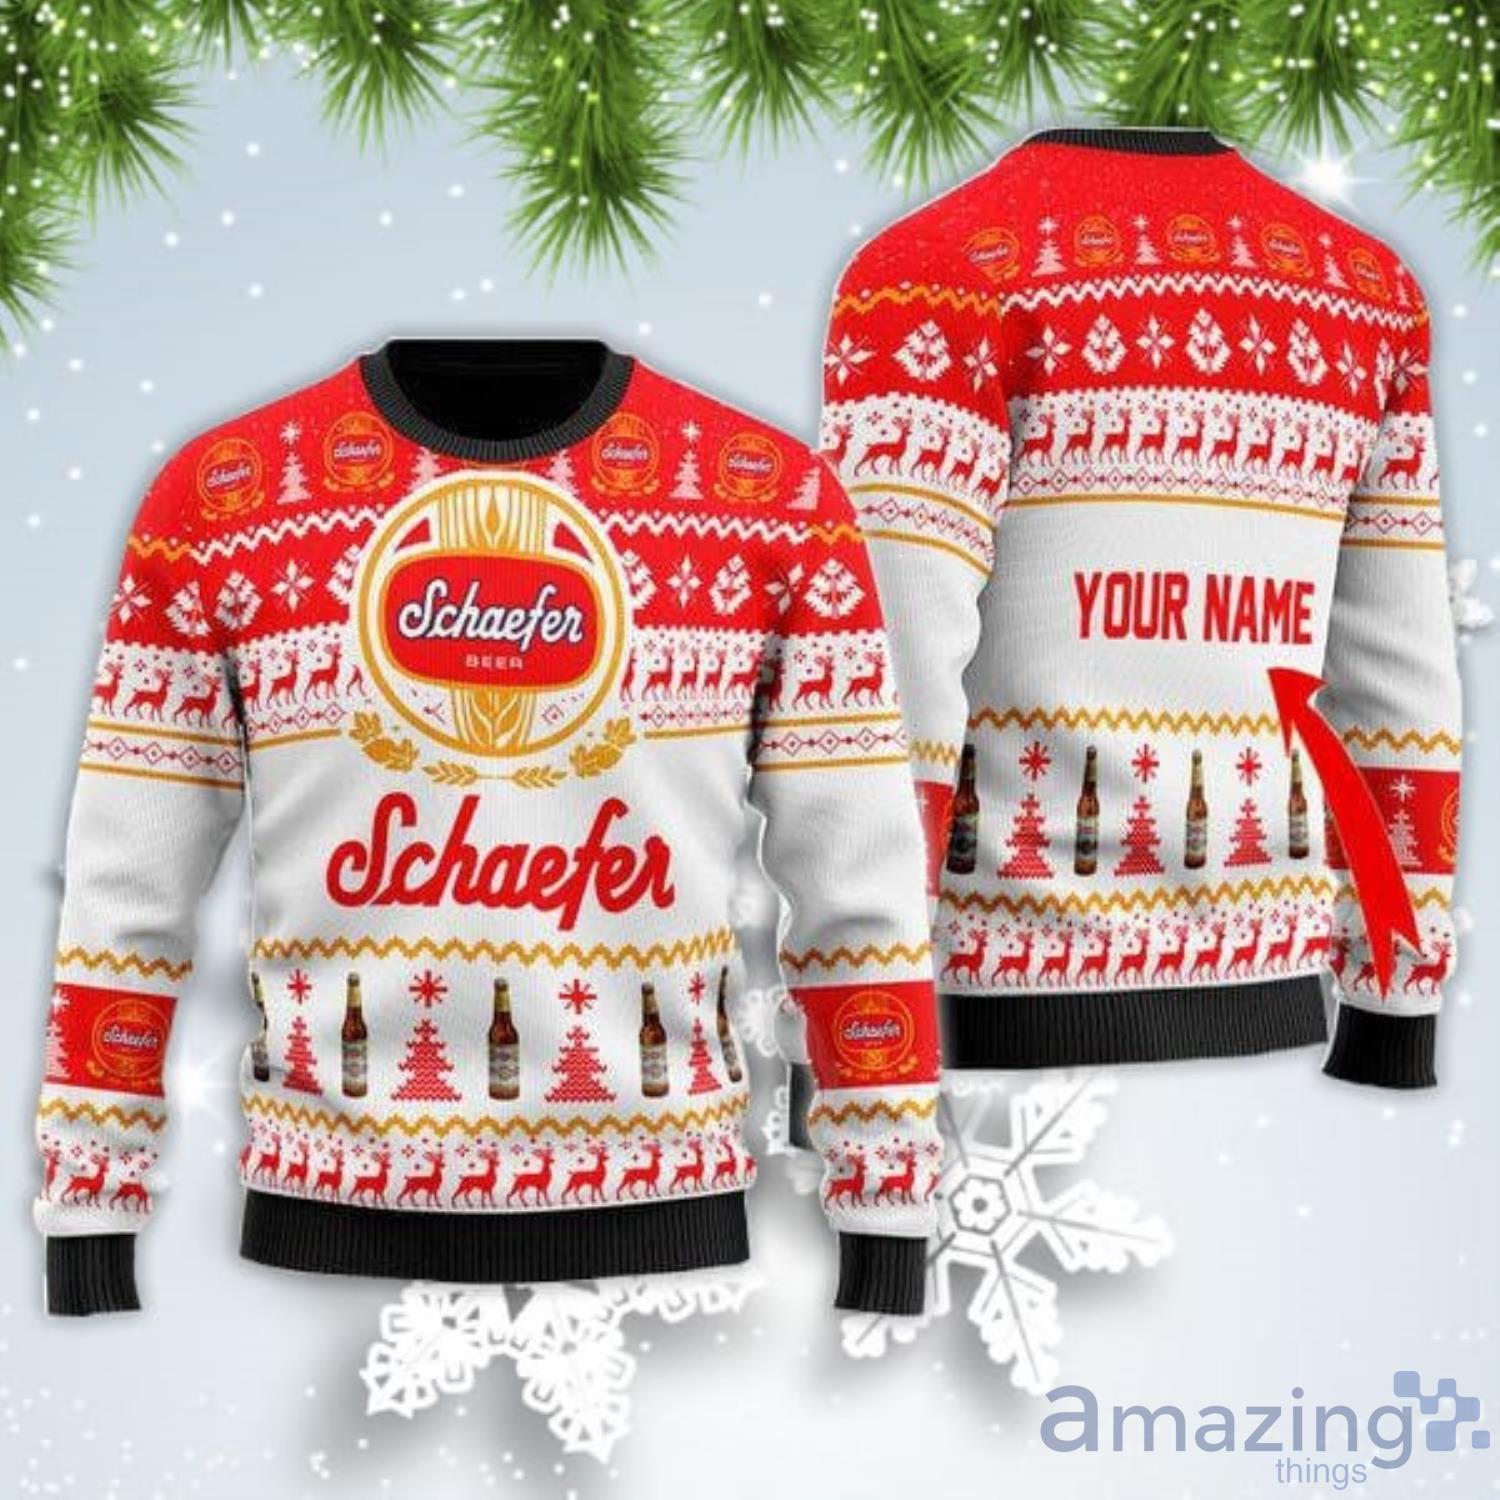 Personalized Name Schaefer Beer Christmas Gift Ugly Christmas Sweater Product Photo 1